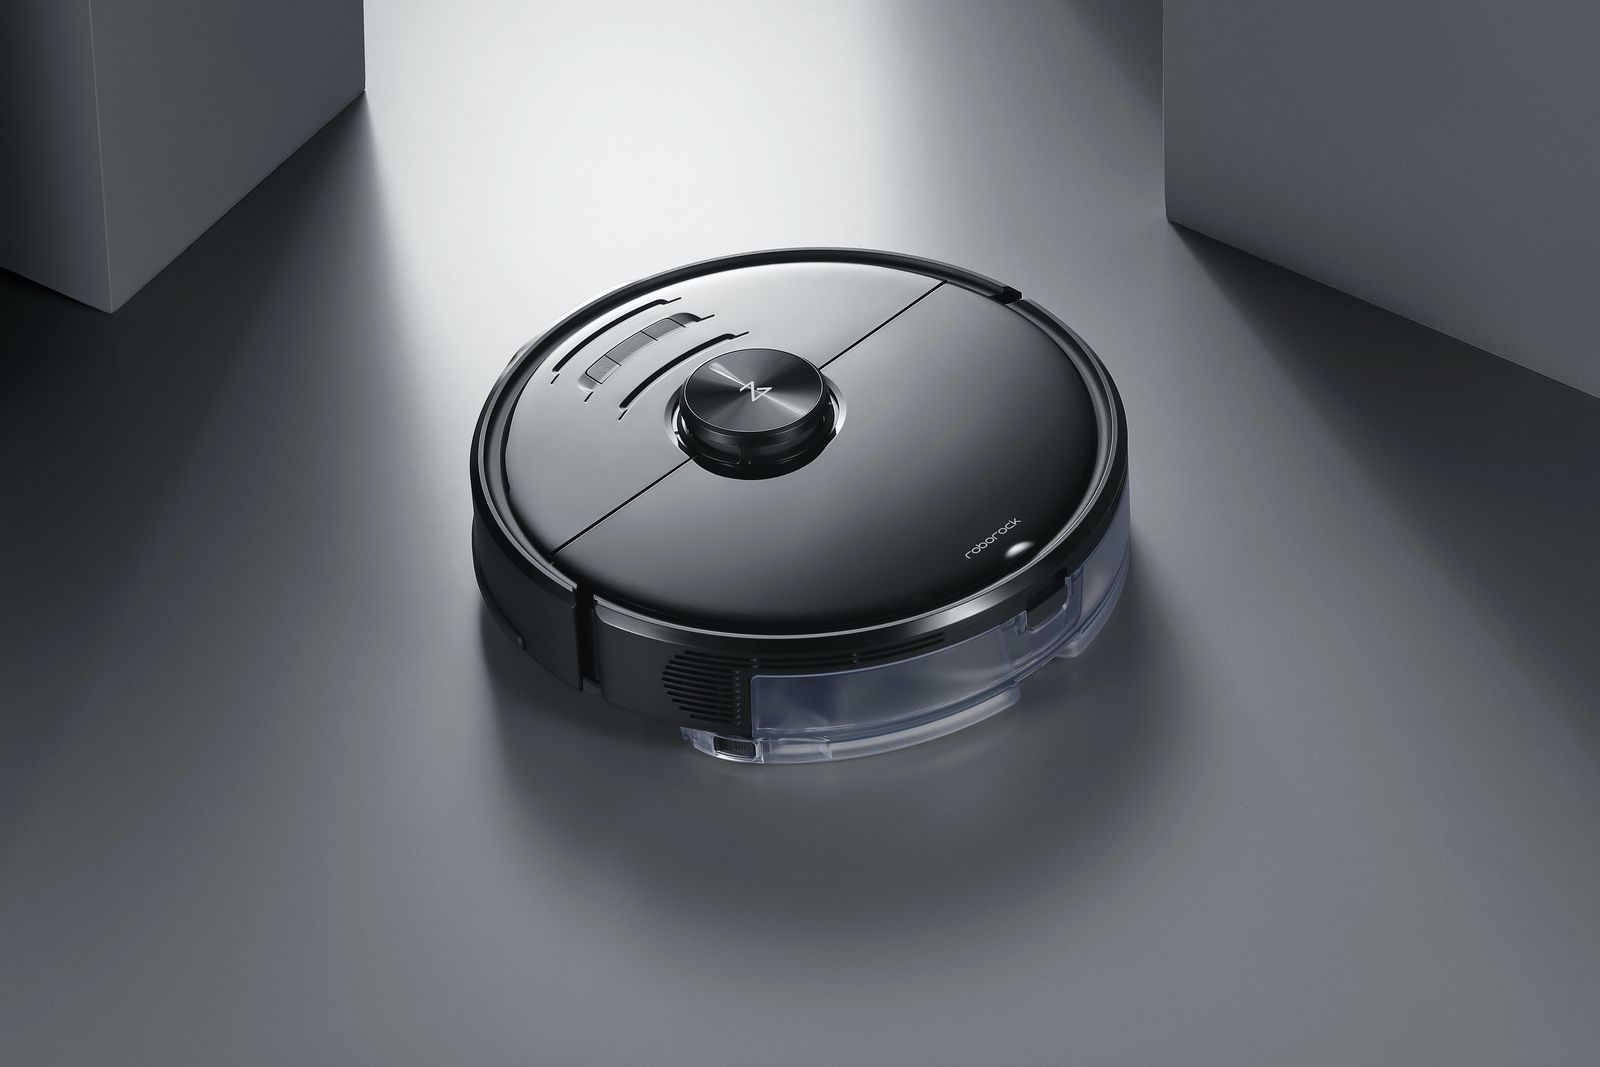 Robot Vacuums Just Got Better - We Explore The Advances In Technology image 1